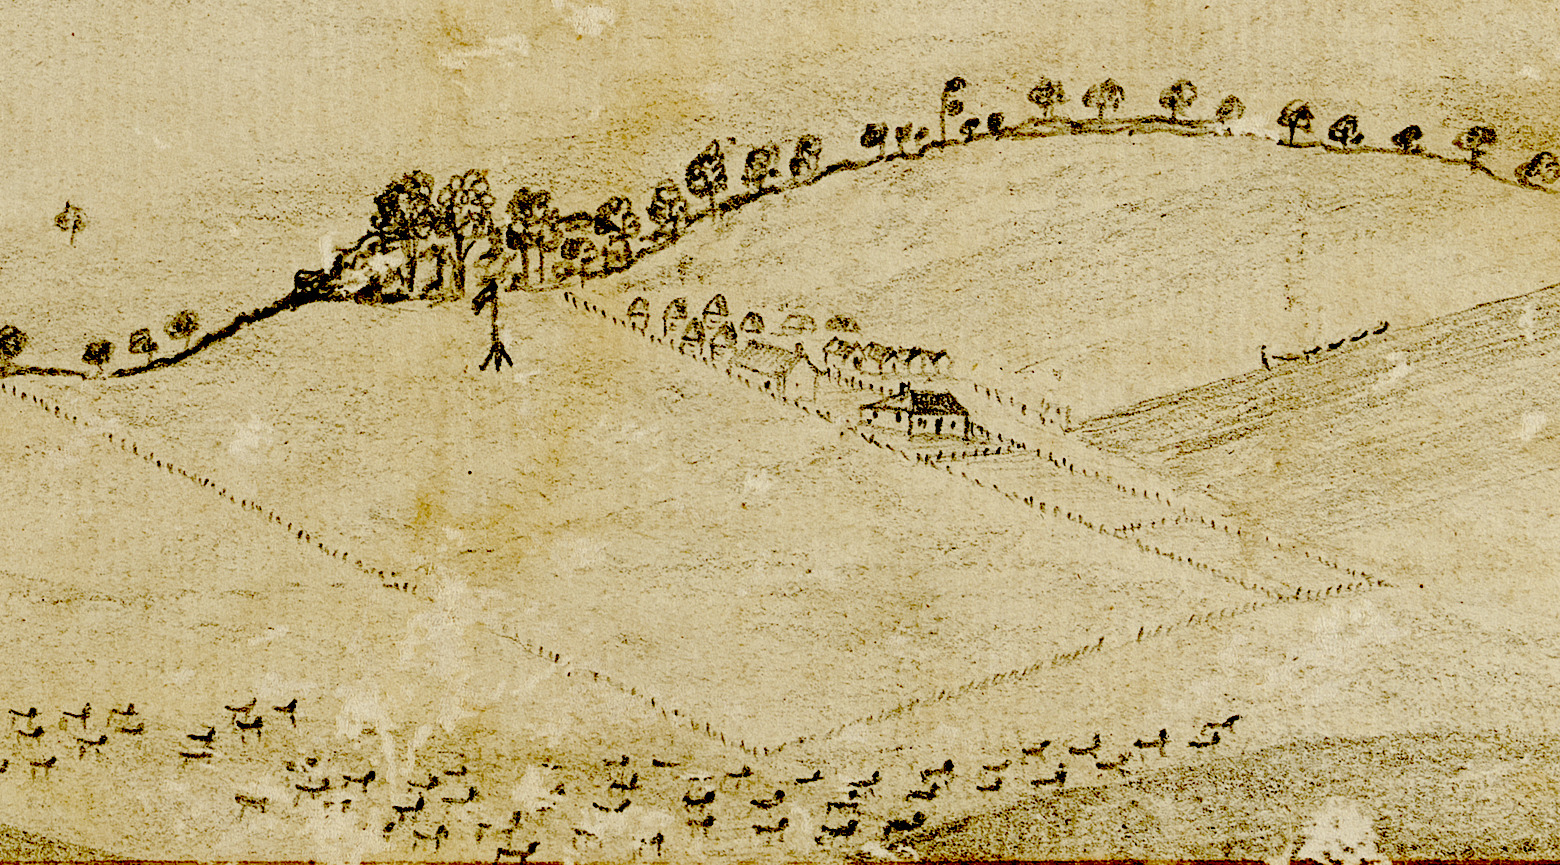 A sketch of the Bathurst Plains from about 1820